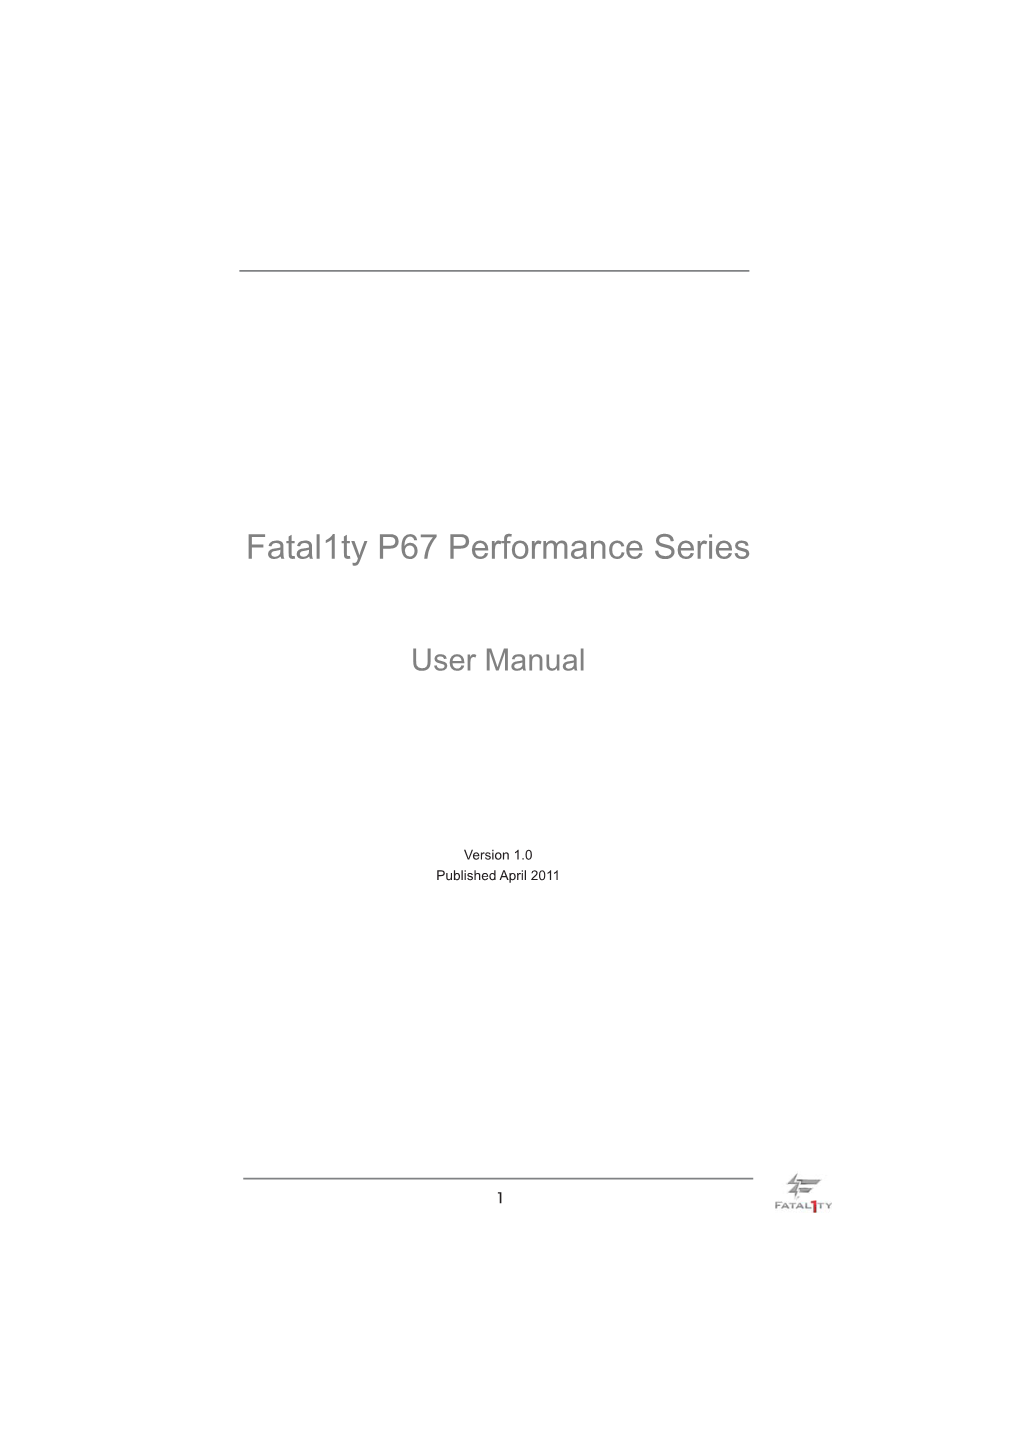 Fatal1ty P67 Performance Series UM.Indd